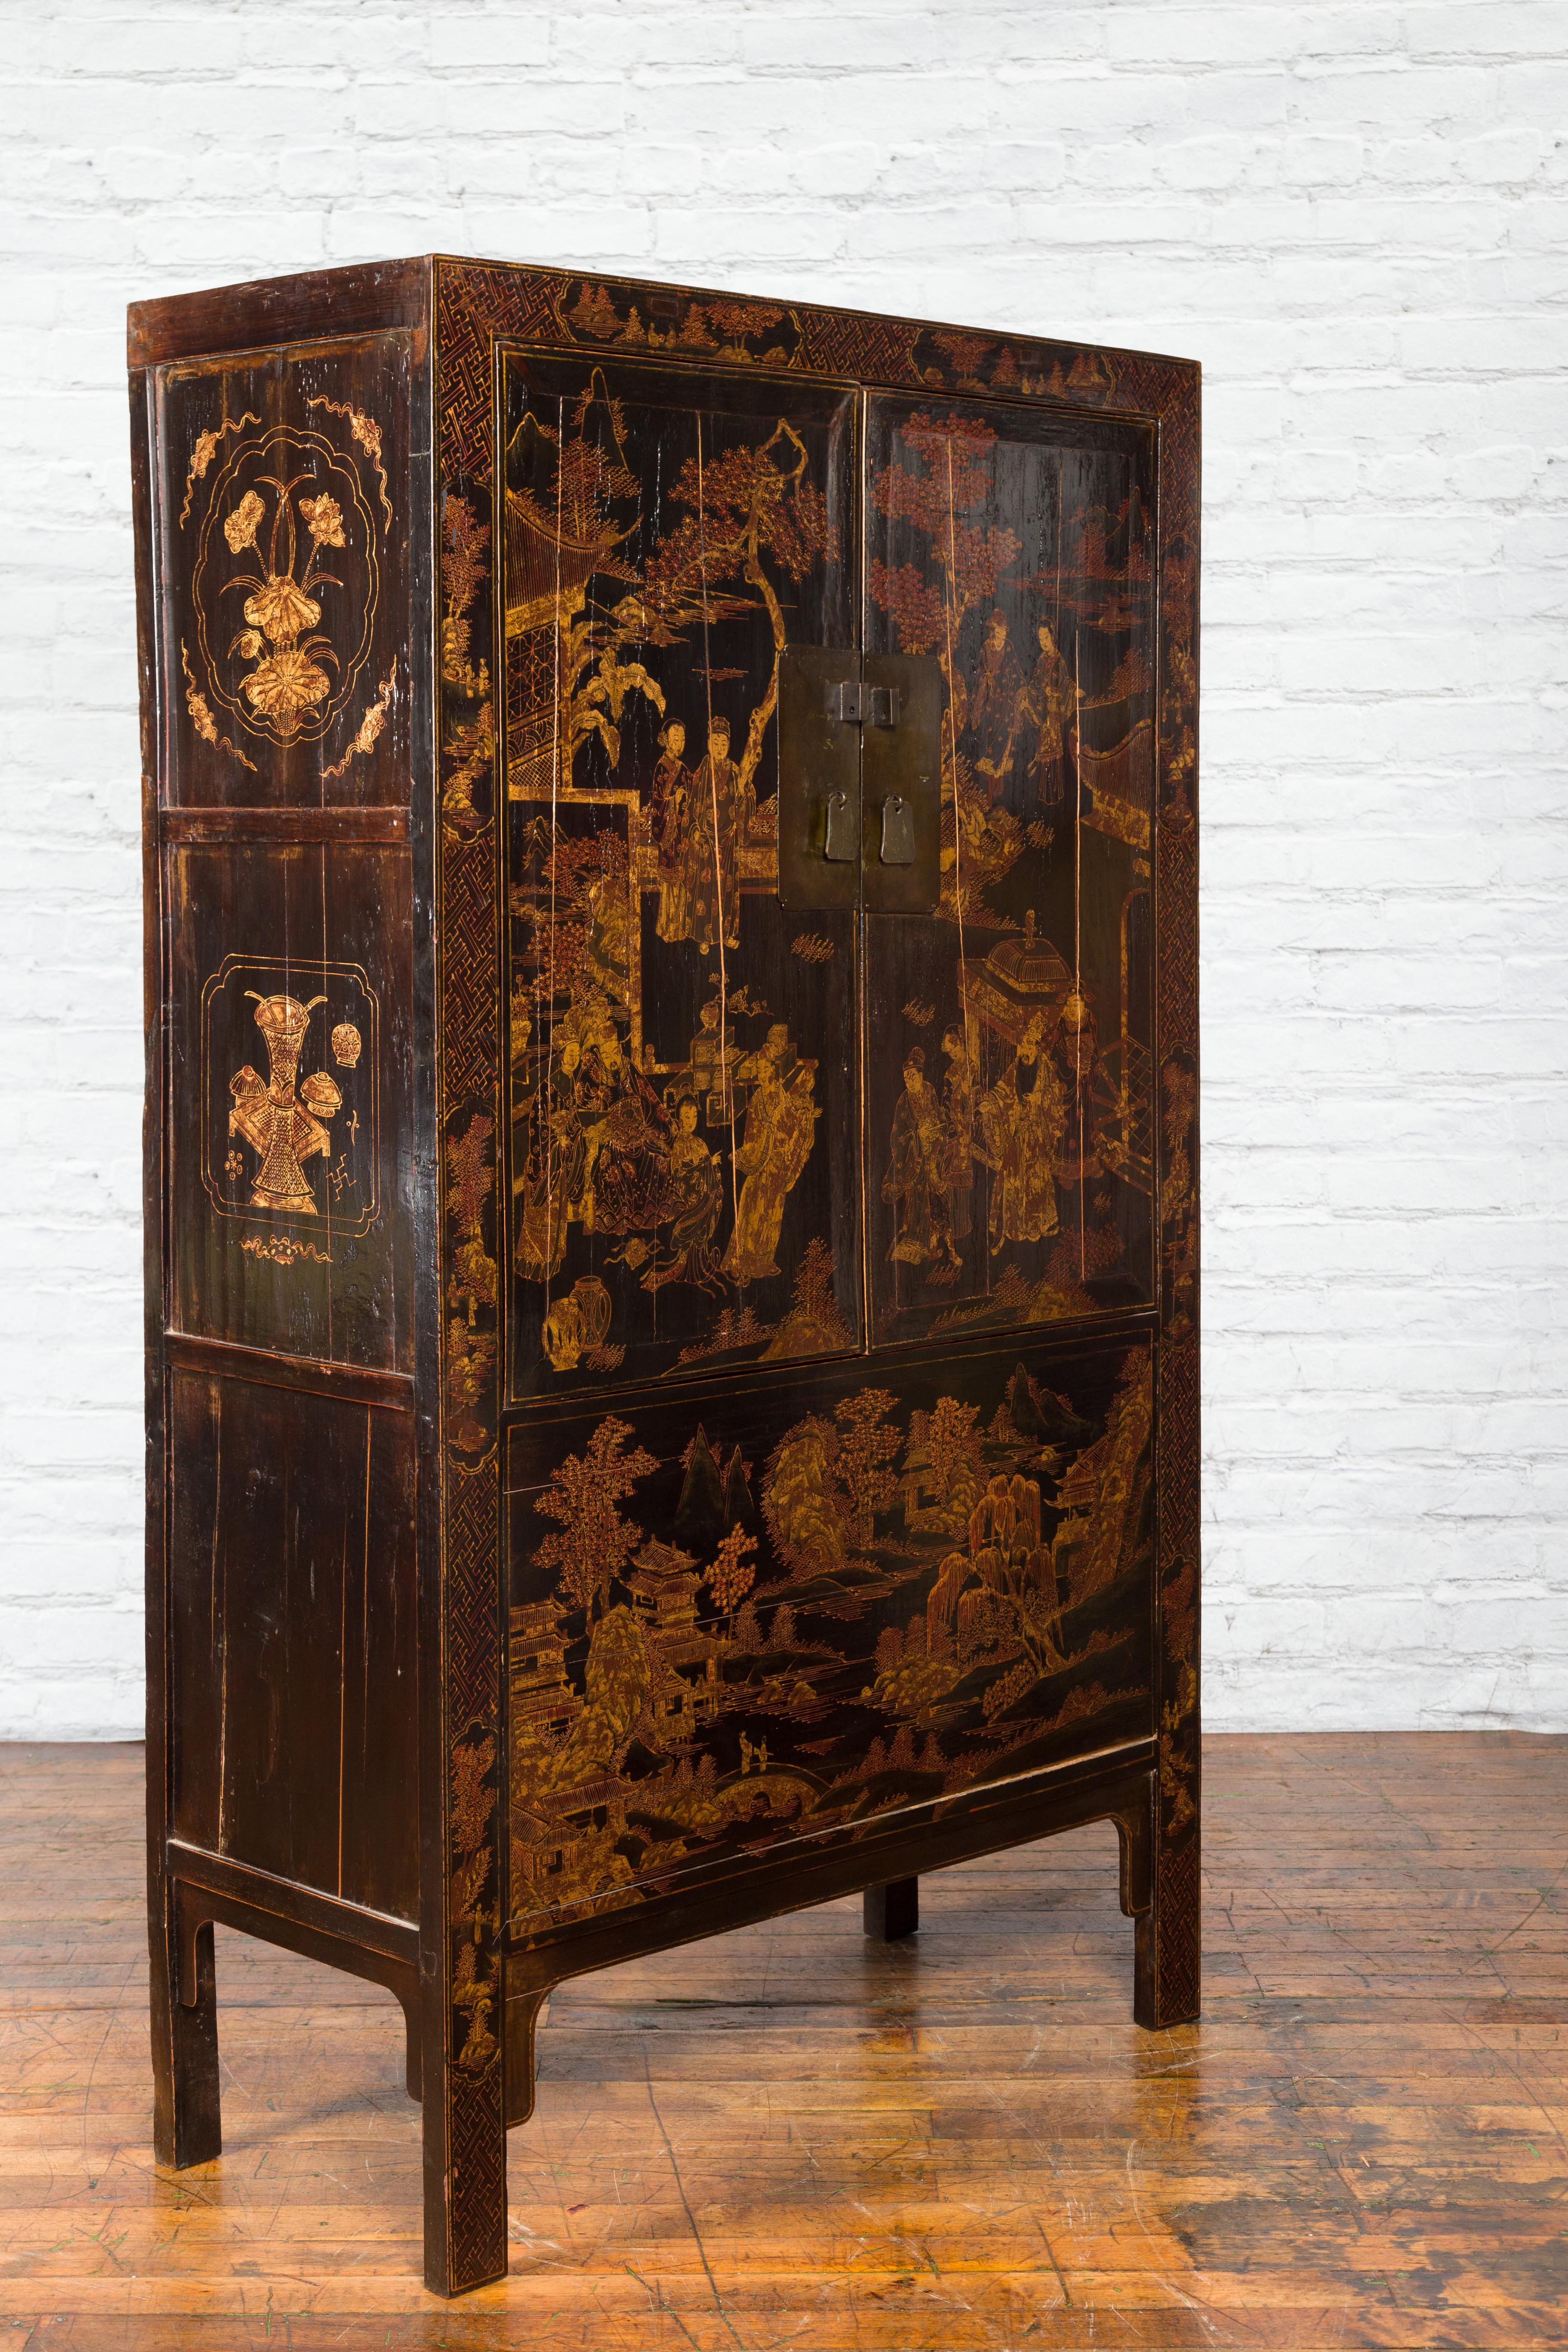 A pair of Chinese Qing Dynasty period black lacquered cabinets from the 19th century, with gilt Chinoiserie décor and hidden drawers. Created in China during the Qing Dynasty era, each of this pair of cabinets features a black lacquered ground